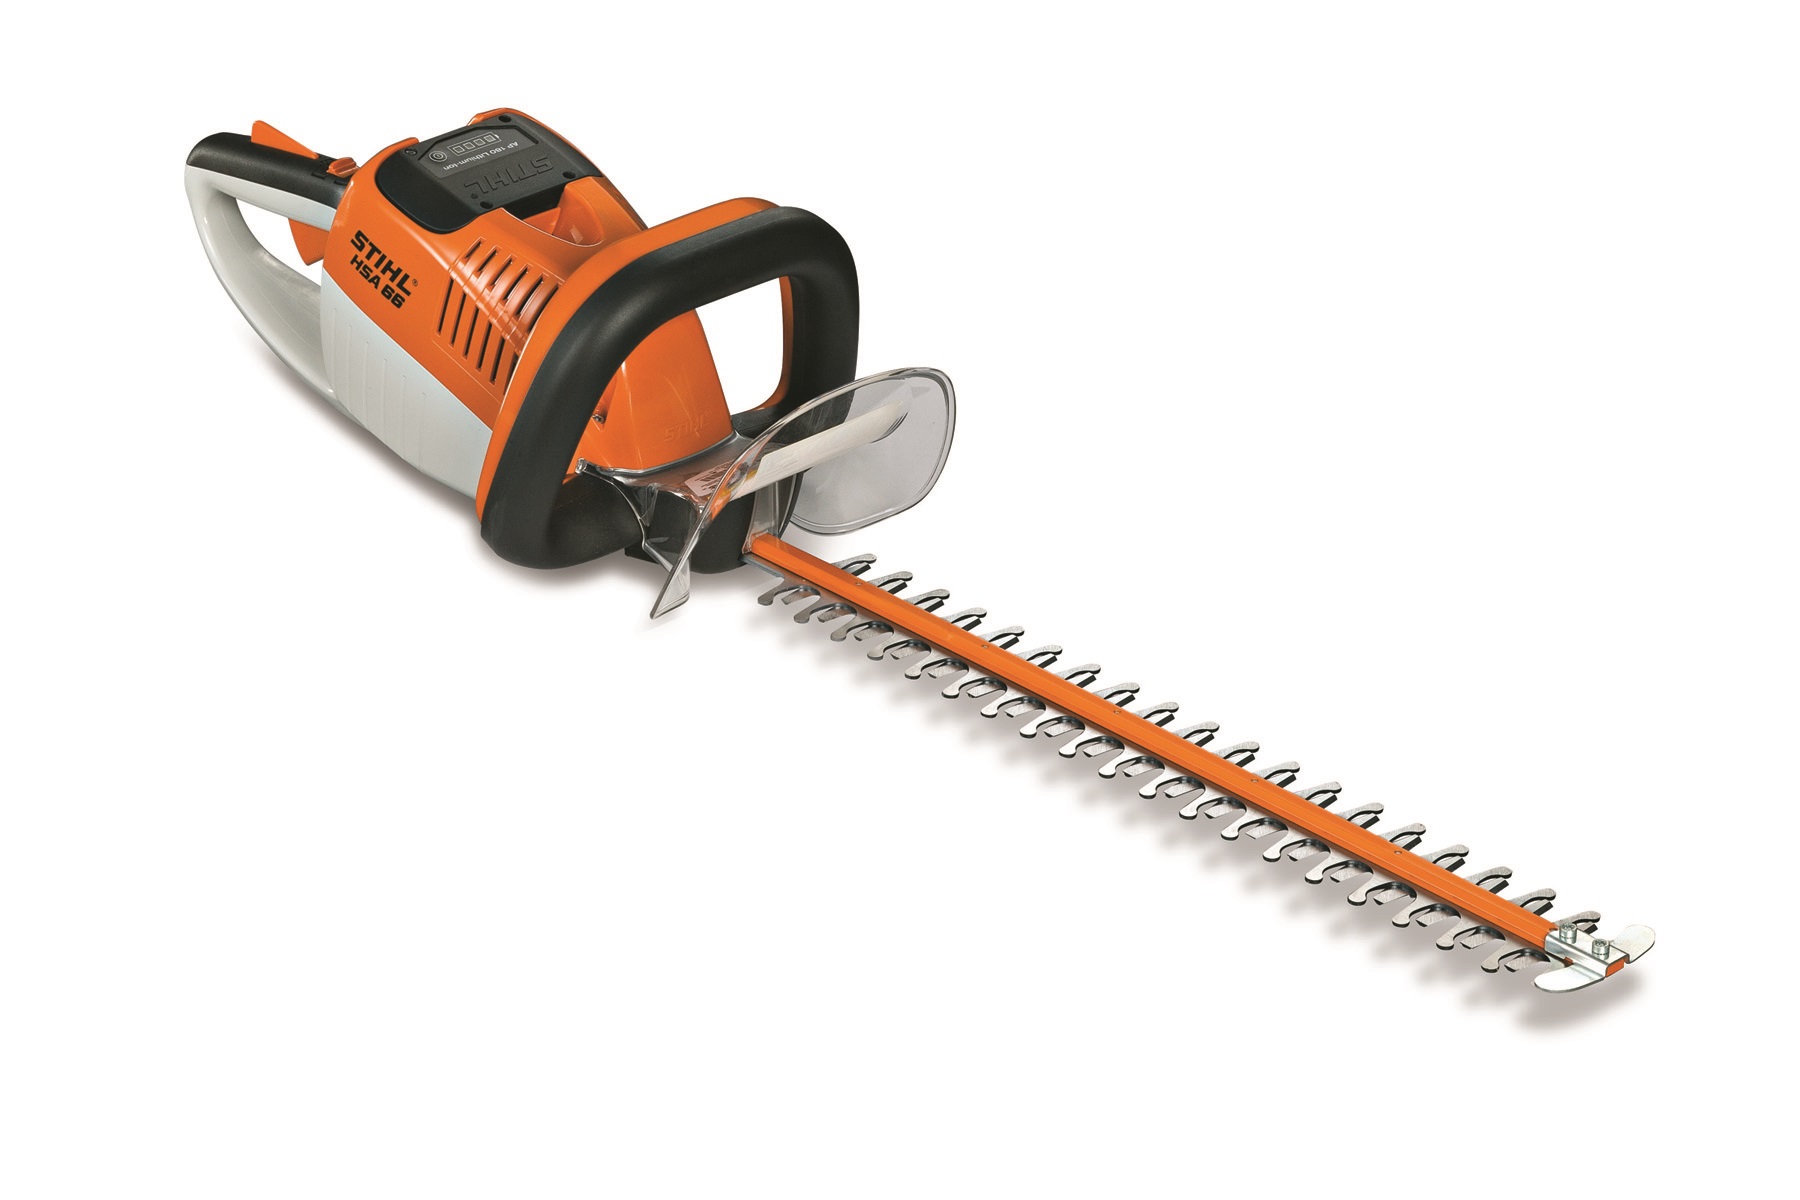 stihl hedge trimmer battery powered hla 65